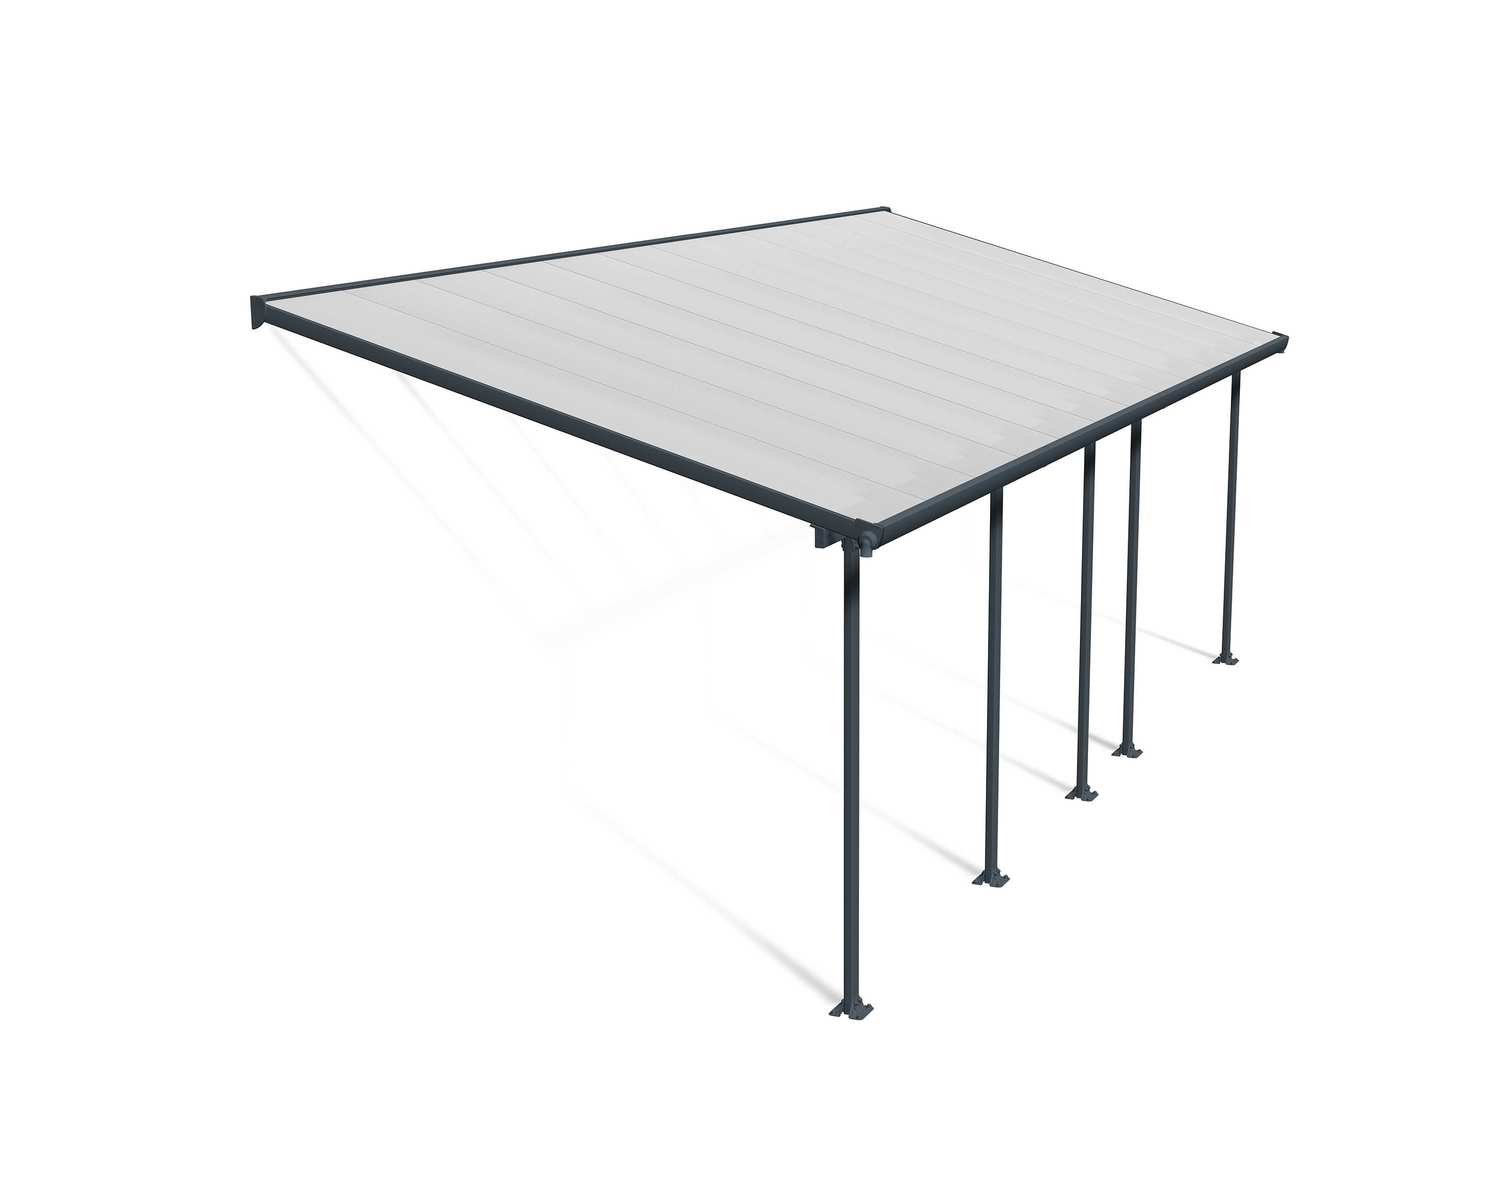 Feria 10 ft. x 24 ft. Grey Aluminium Patio Cover With 5 Posts, Clear Twin-Wall Polycarbonate Roof Panels.